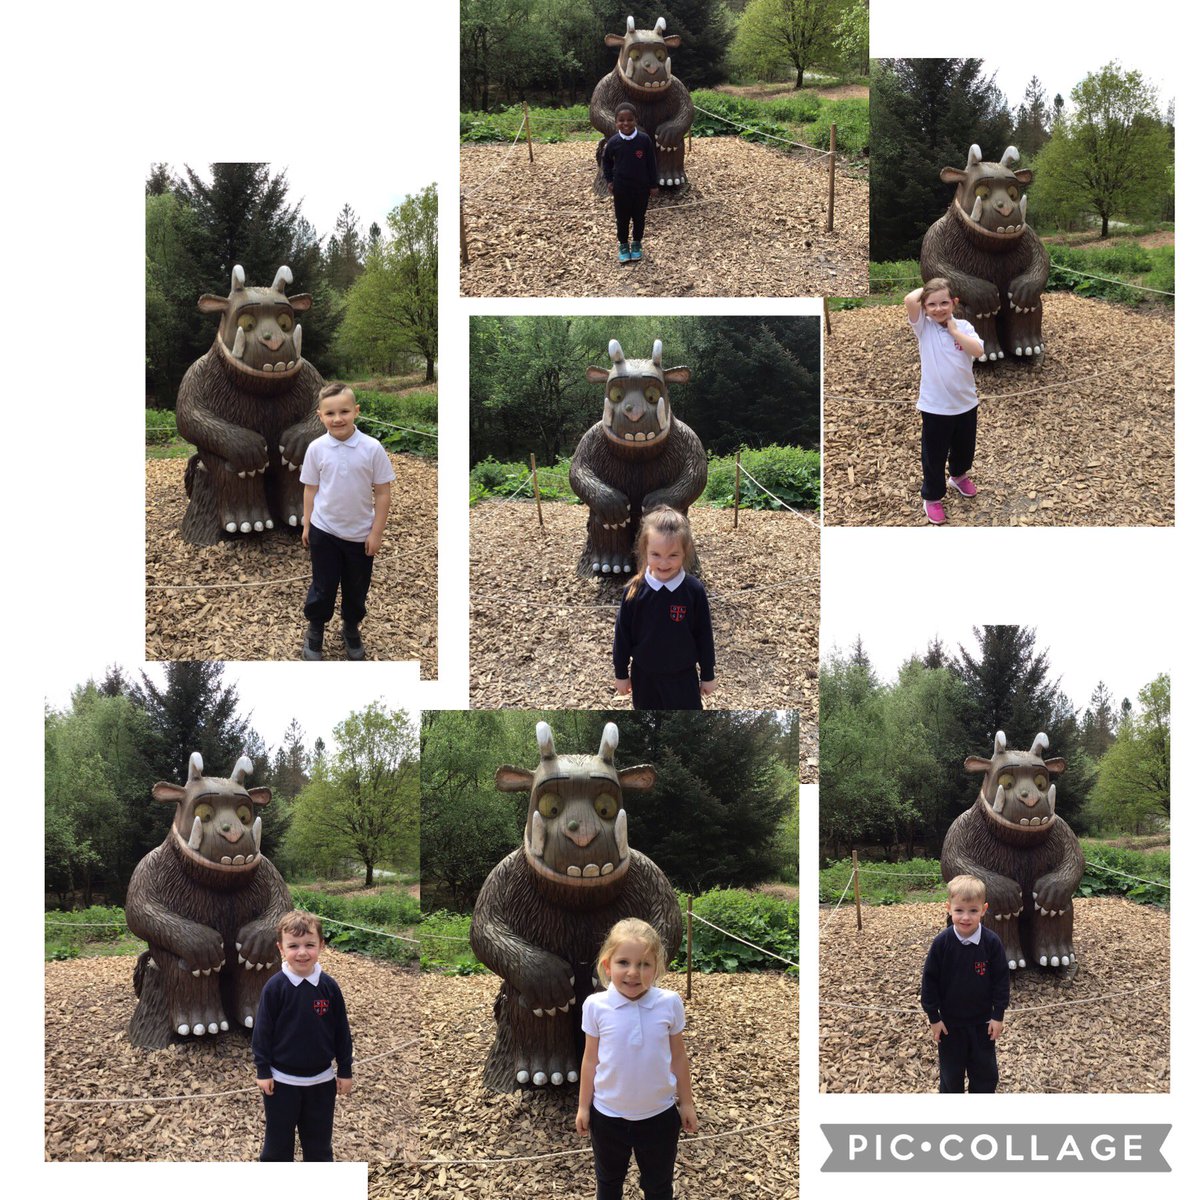 We had such a good day out and look who we found. #OLGHeyfs #OLGHenglish #earlylearning #earlyyears #schooltrip #dayout #delamereforest #gruffalo